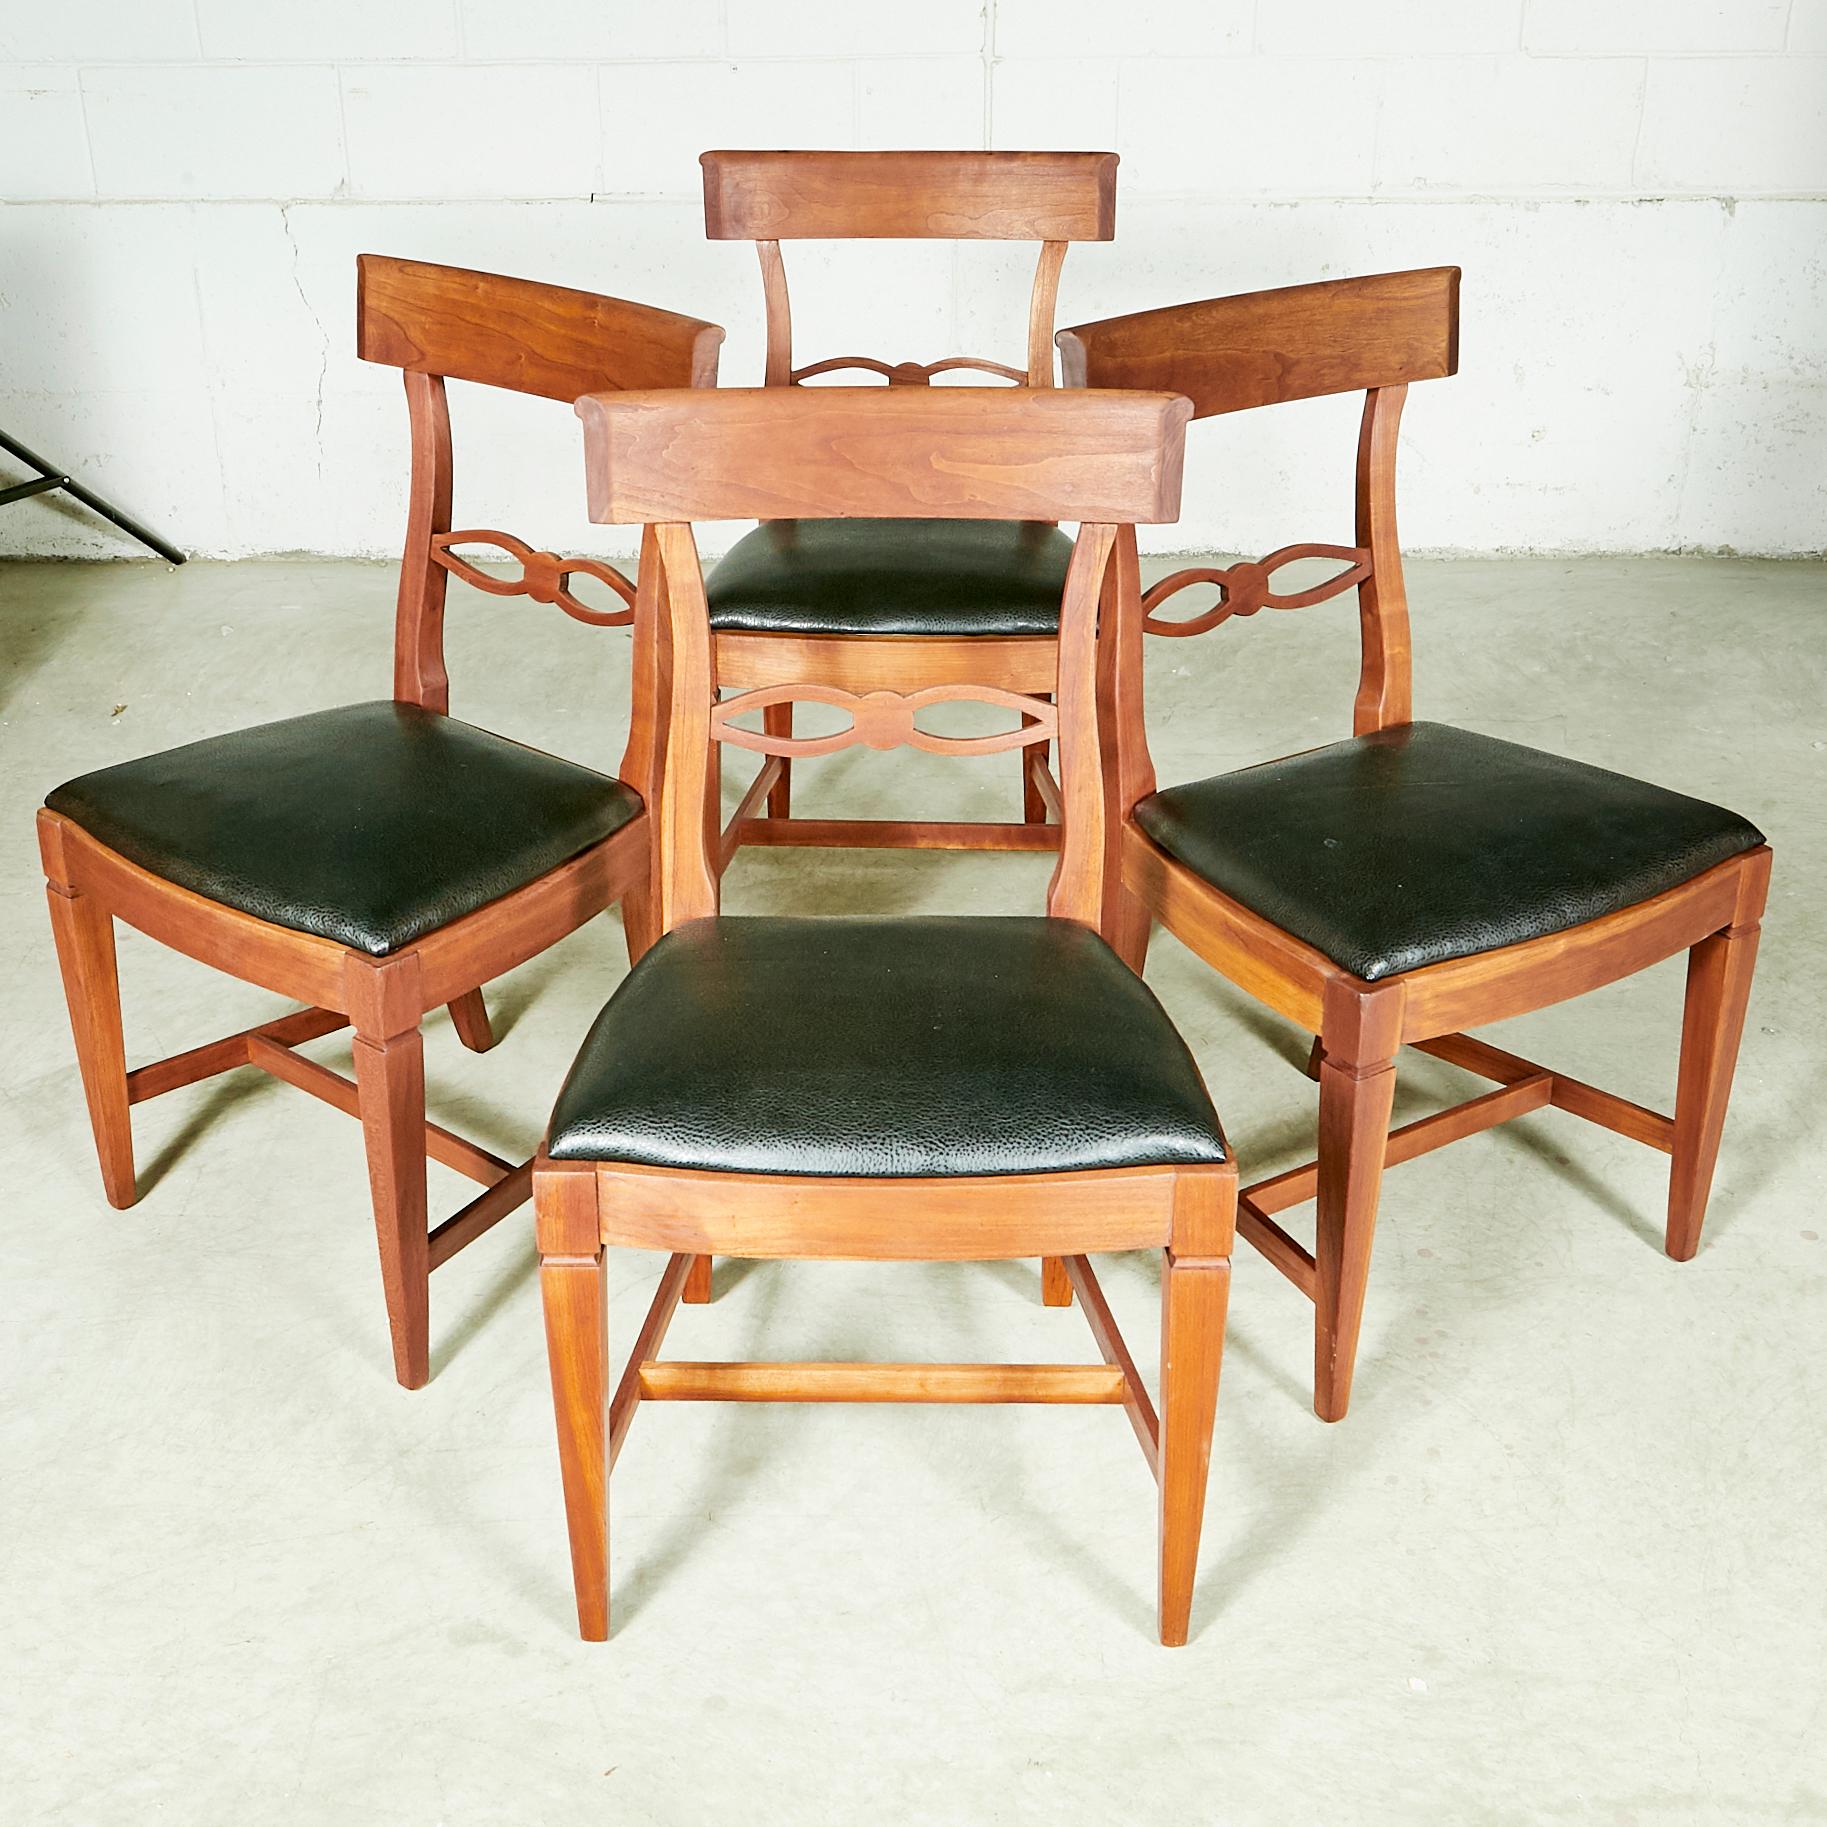 Vintage 1950s set of 4 Kindel Furniture Co cherrywood dining room chairs in newly refinished condition and new black Naugahyde seats.